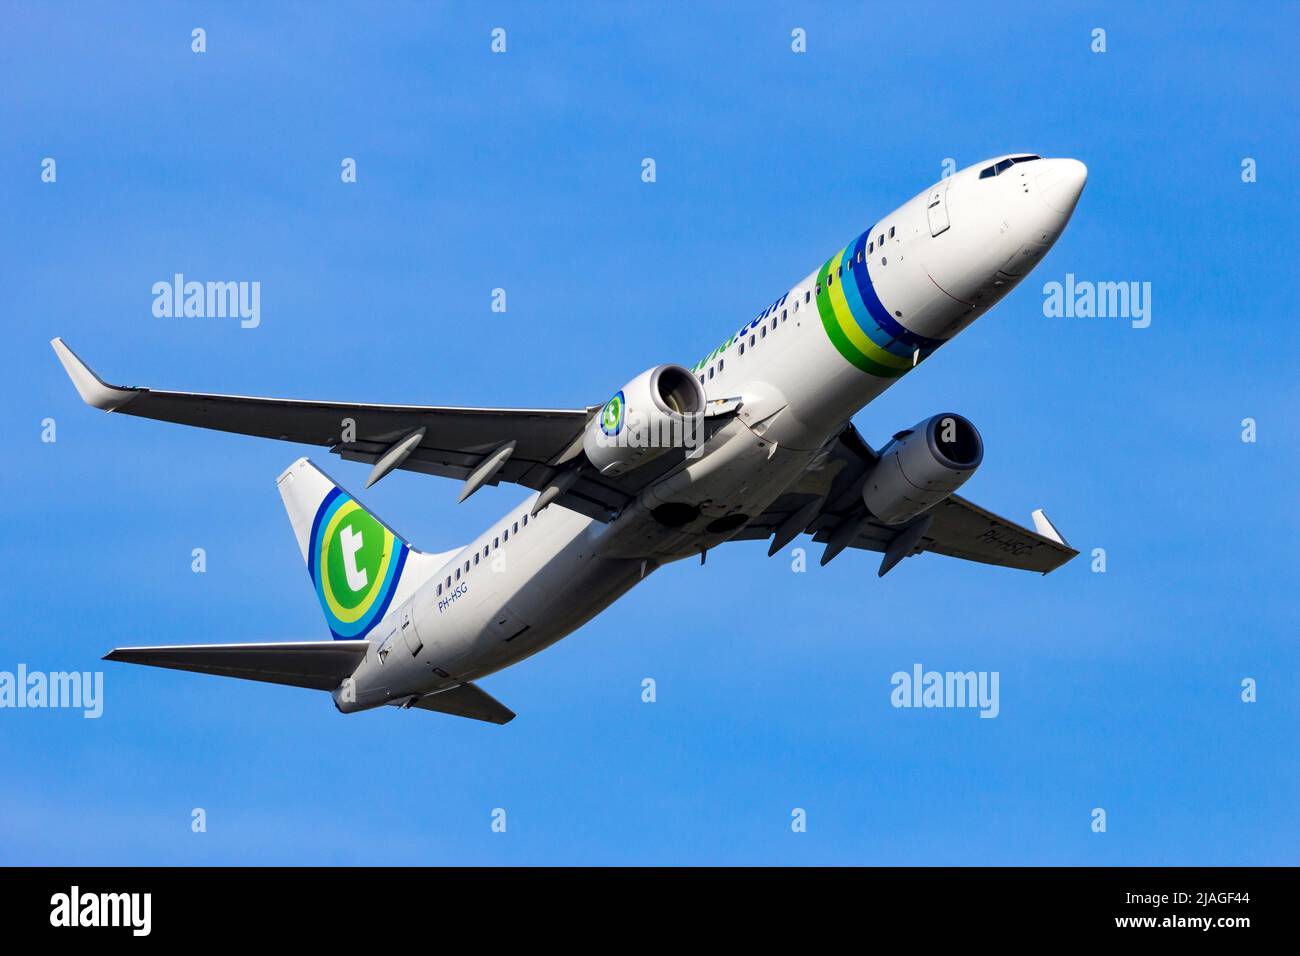 Transavia Airlines Boeing 737 NG pasenger plane take-off from Schiphol Airport. The Netherlands - February 16, 2016 Stock Photo